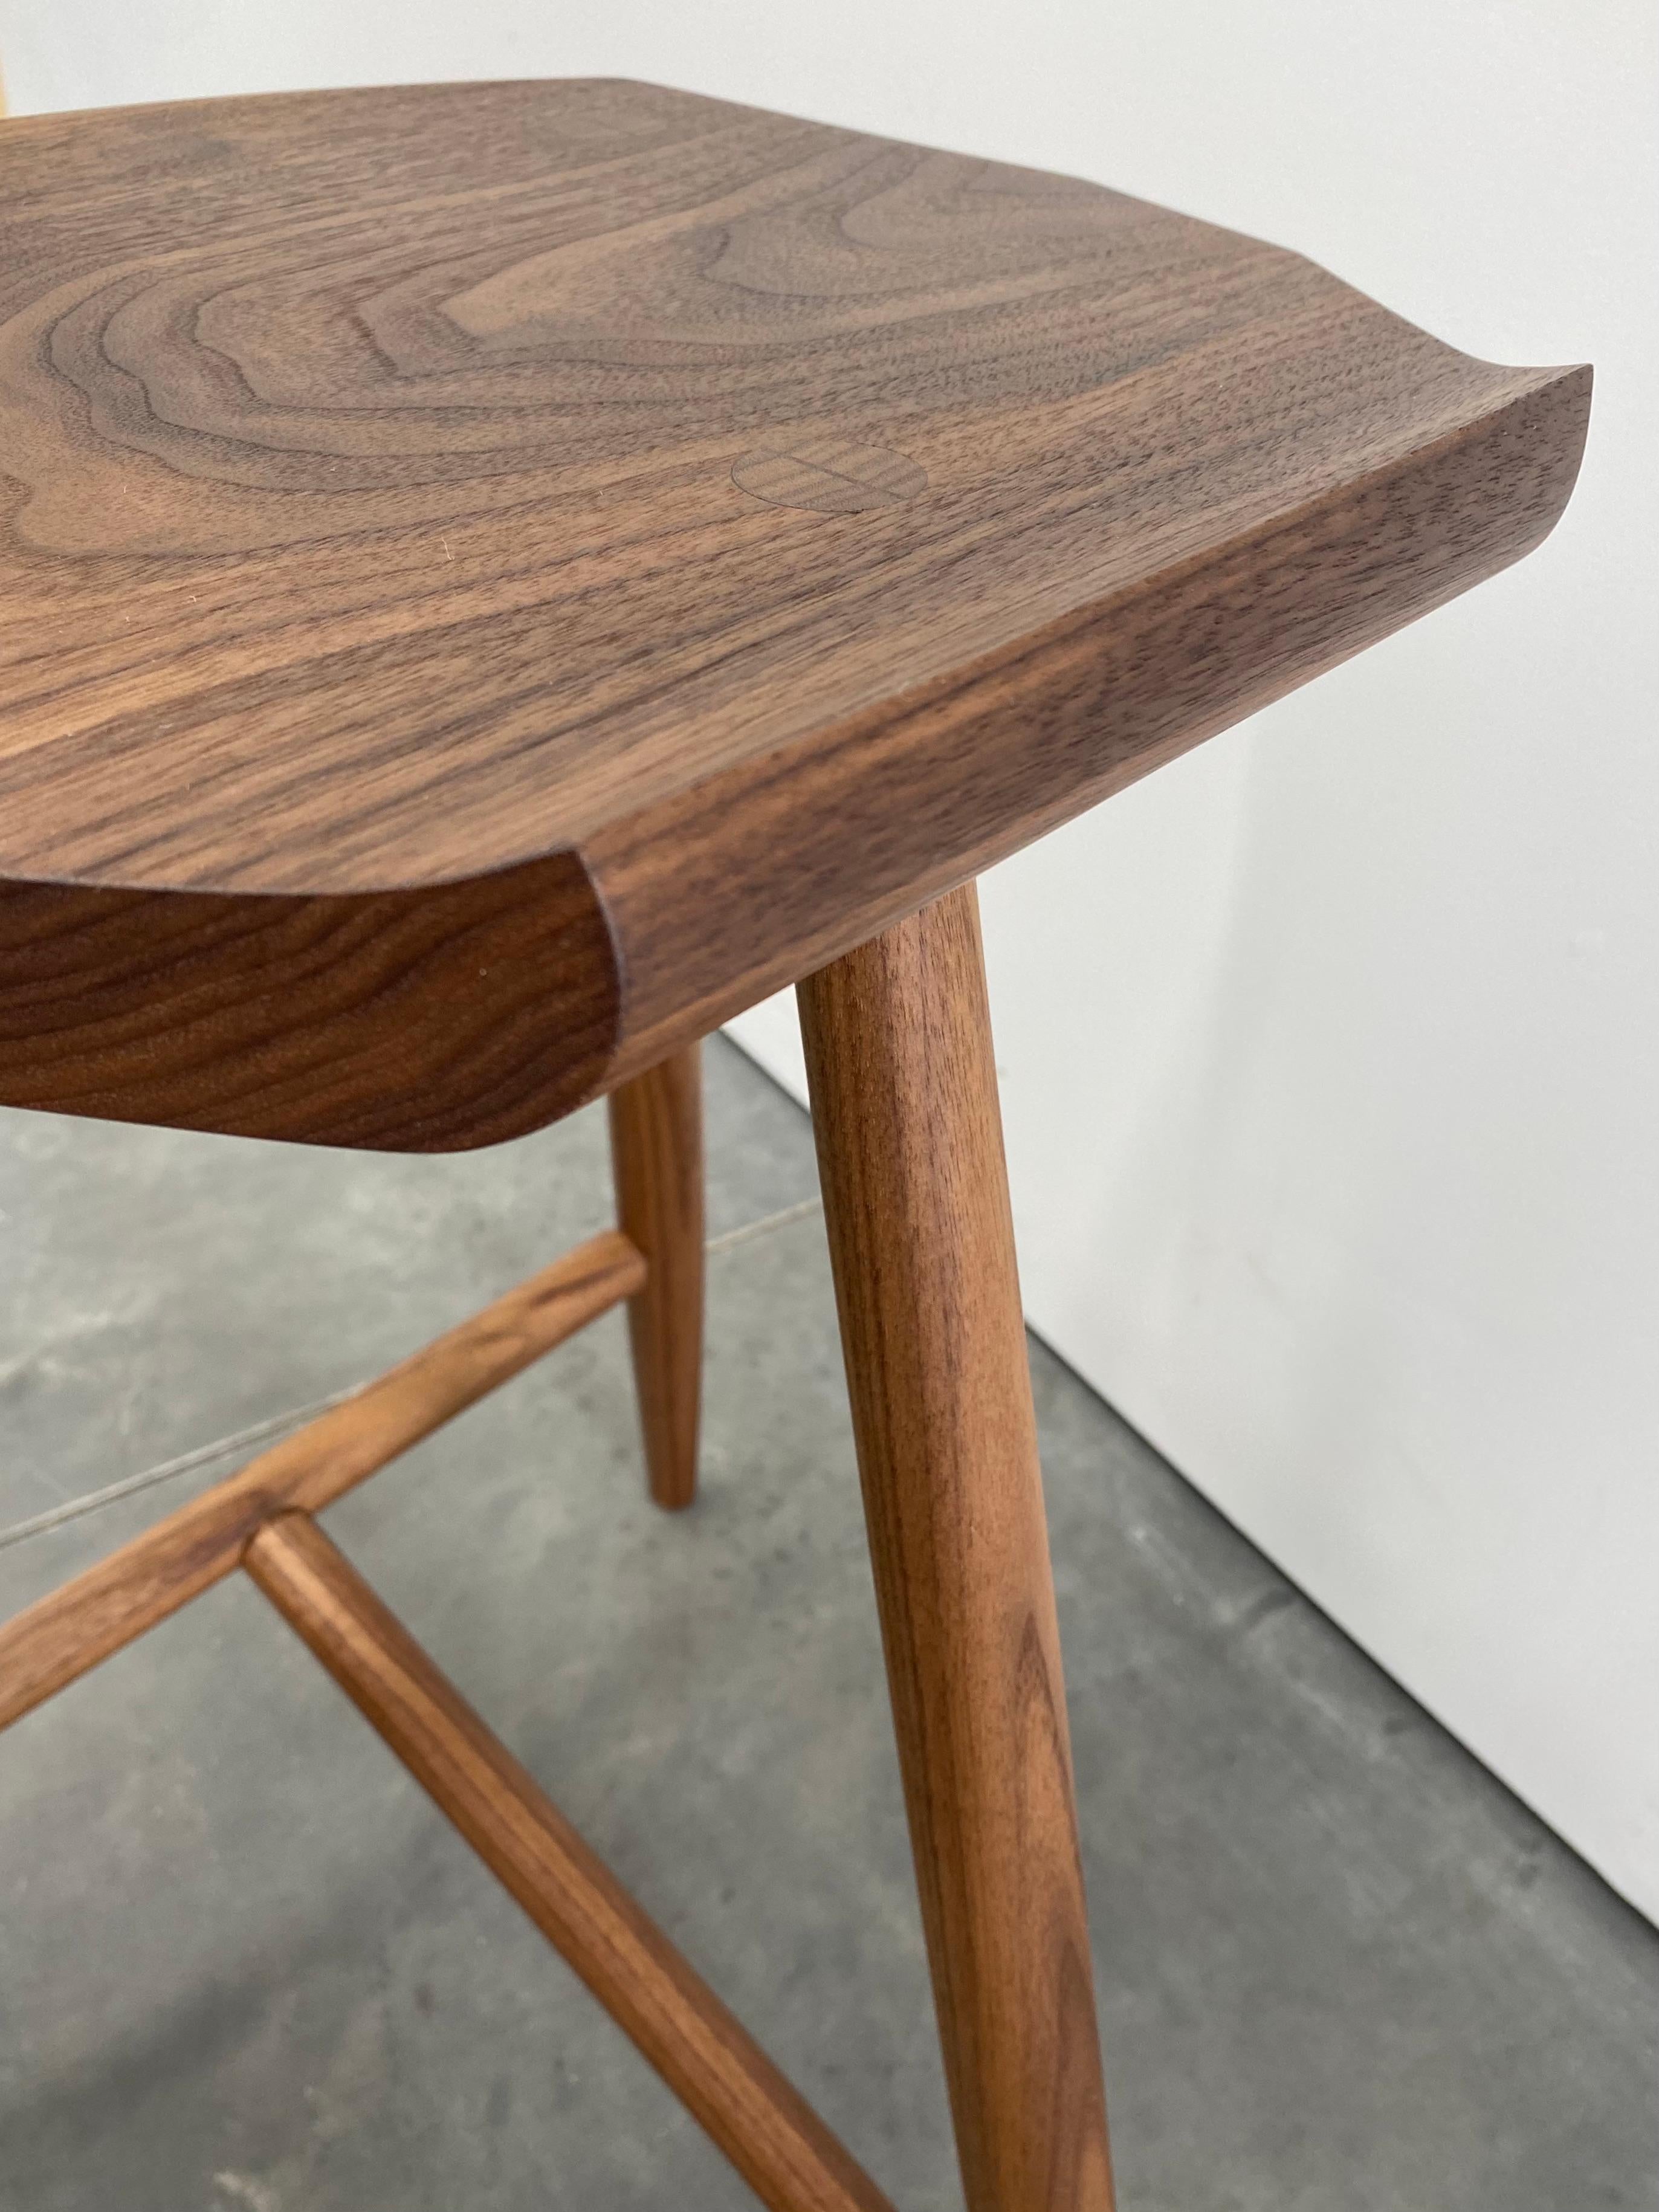 Jordan Walnut Counter Height 3-Legged Stool by New York Heartwoods - In Stock In New Condition For Sale In Accord, NY